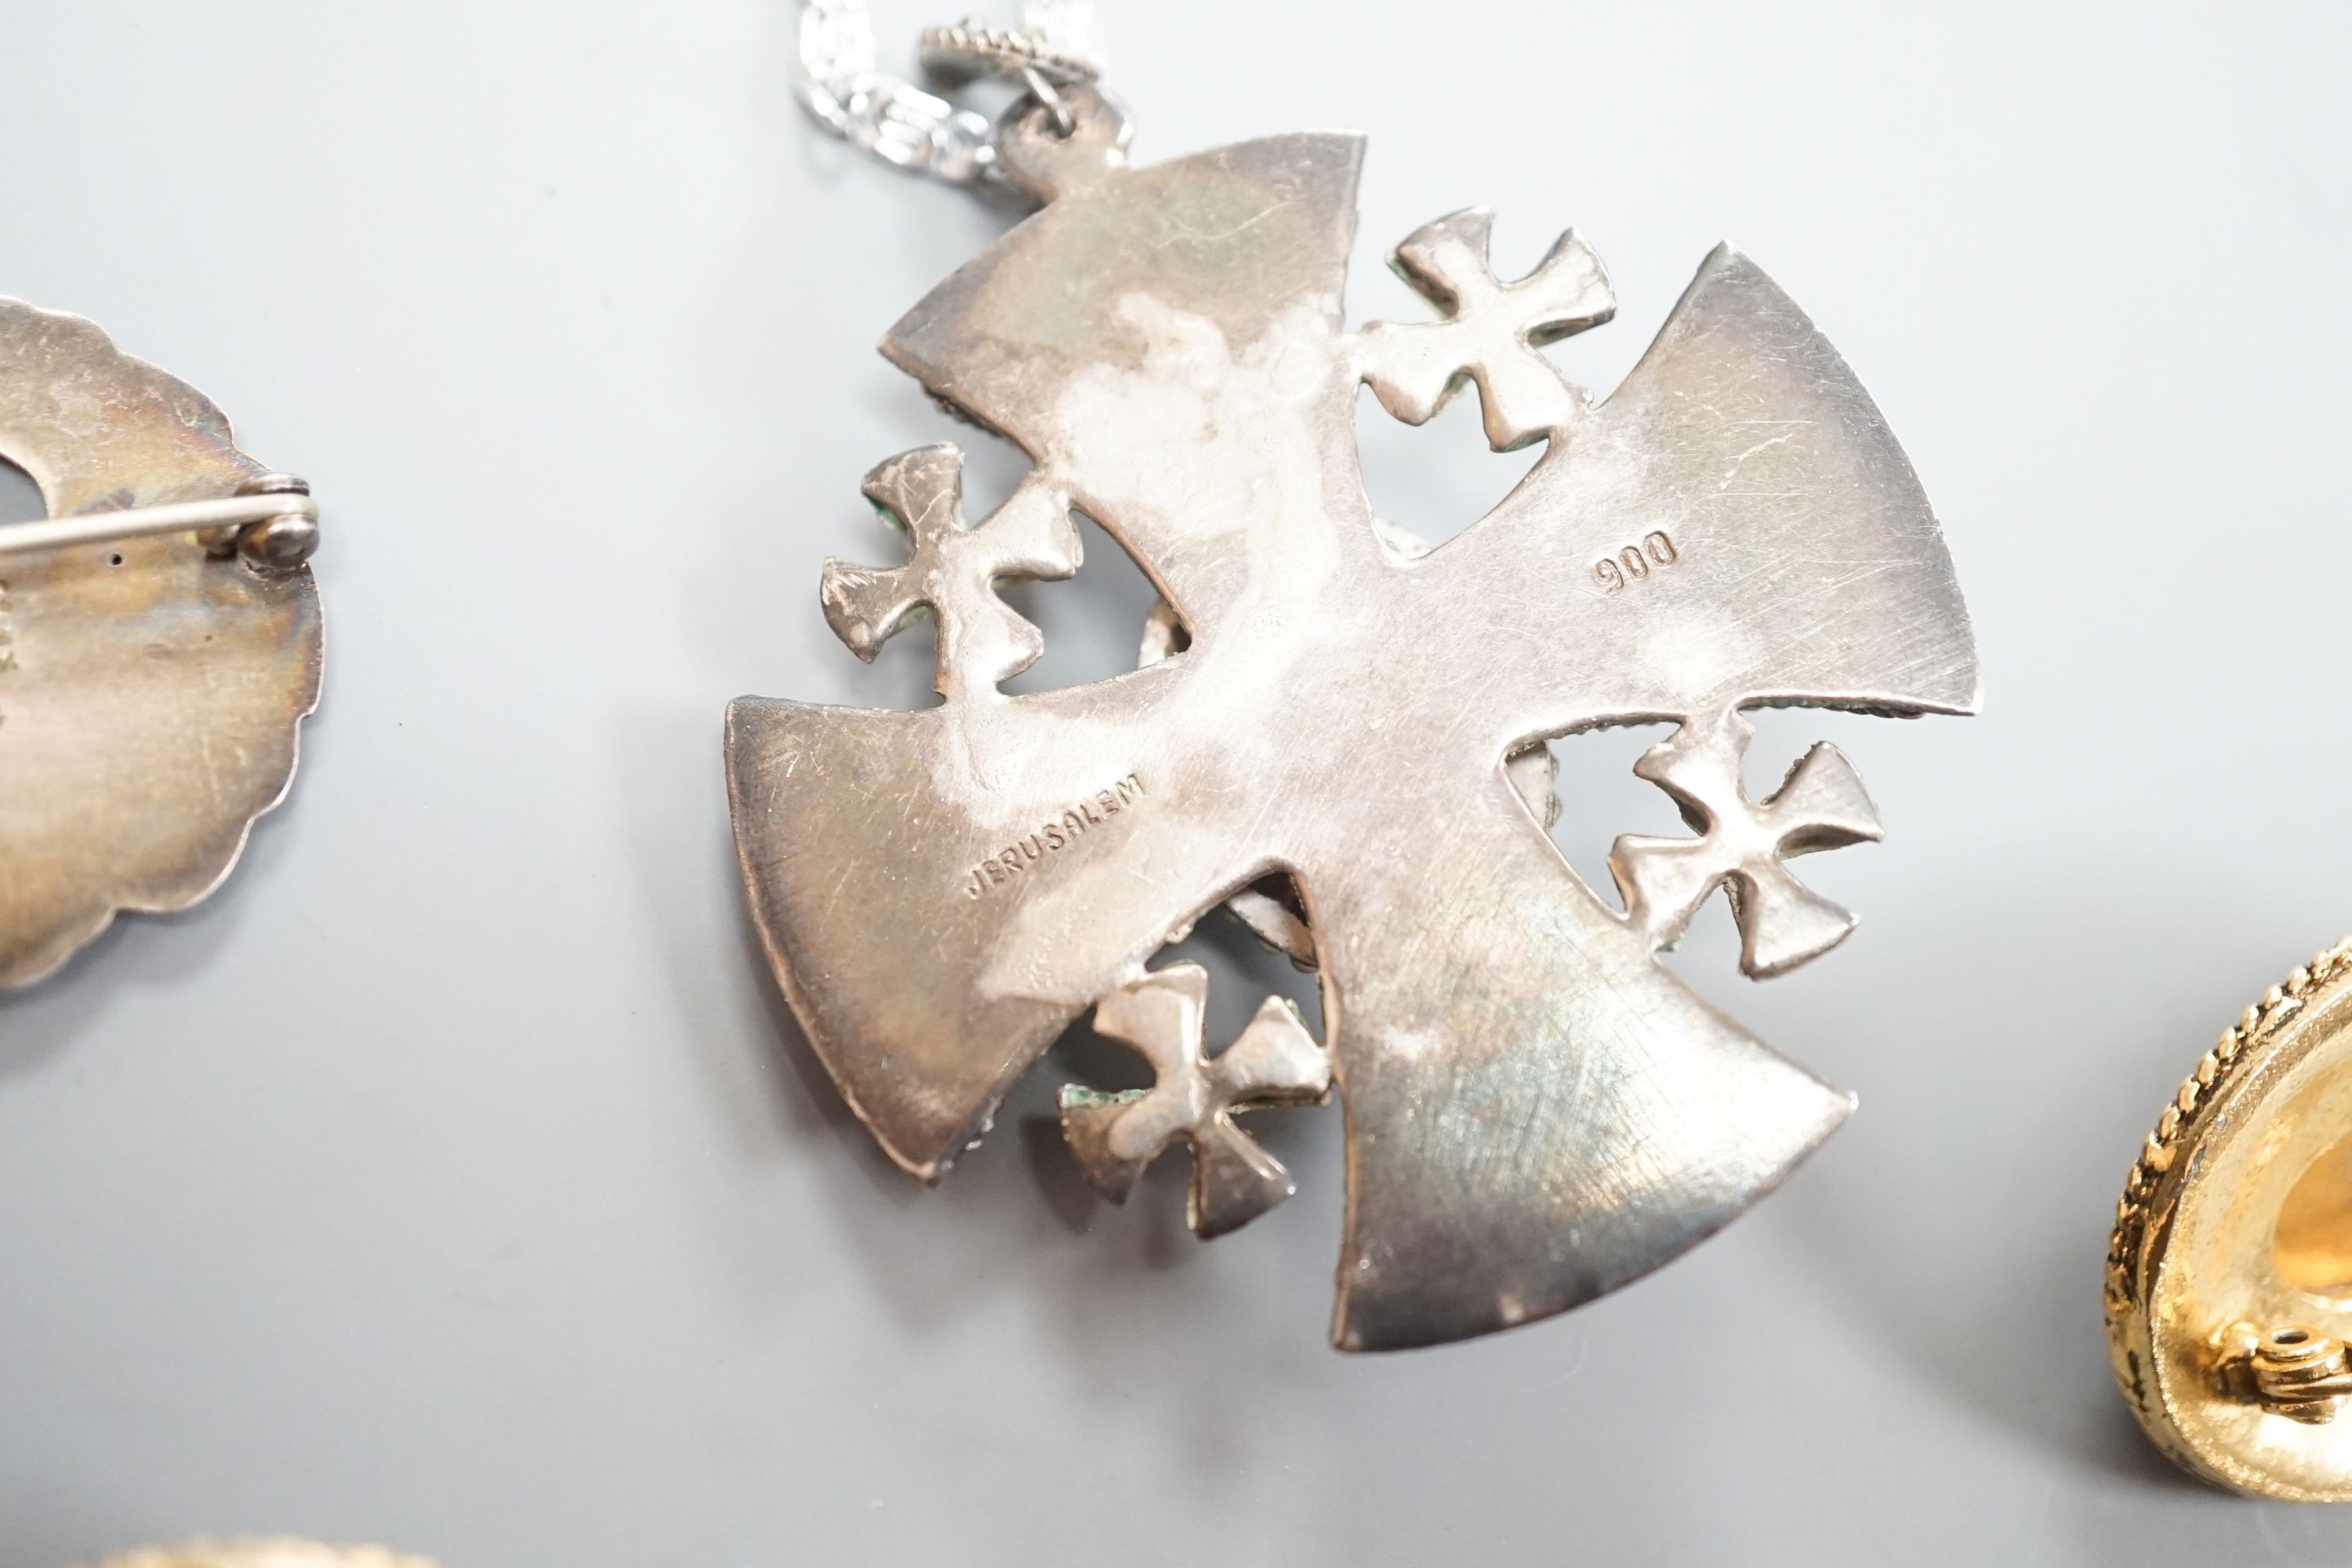 A George Jensen sterling dove and wreath brooch, no. 134, 29mm and minor costume jewellery.